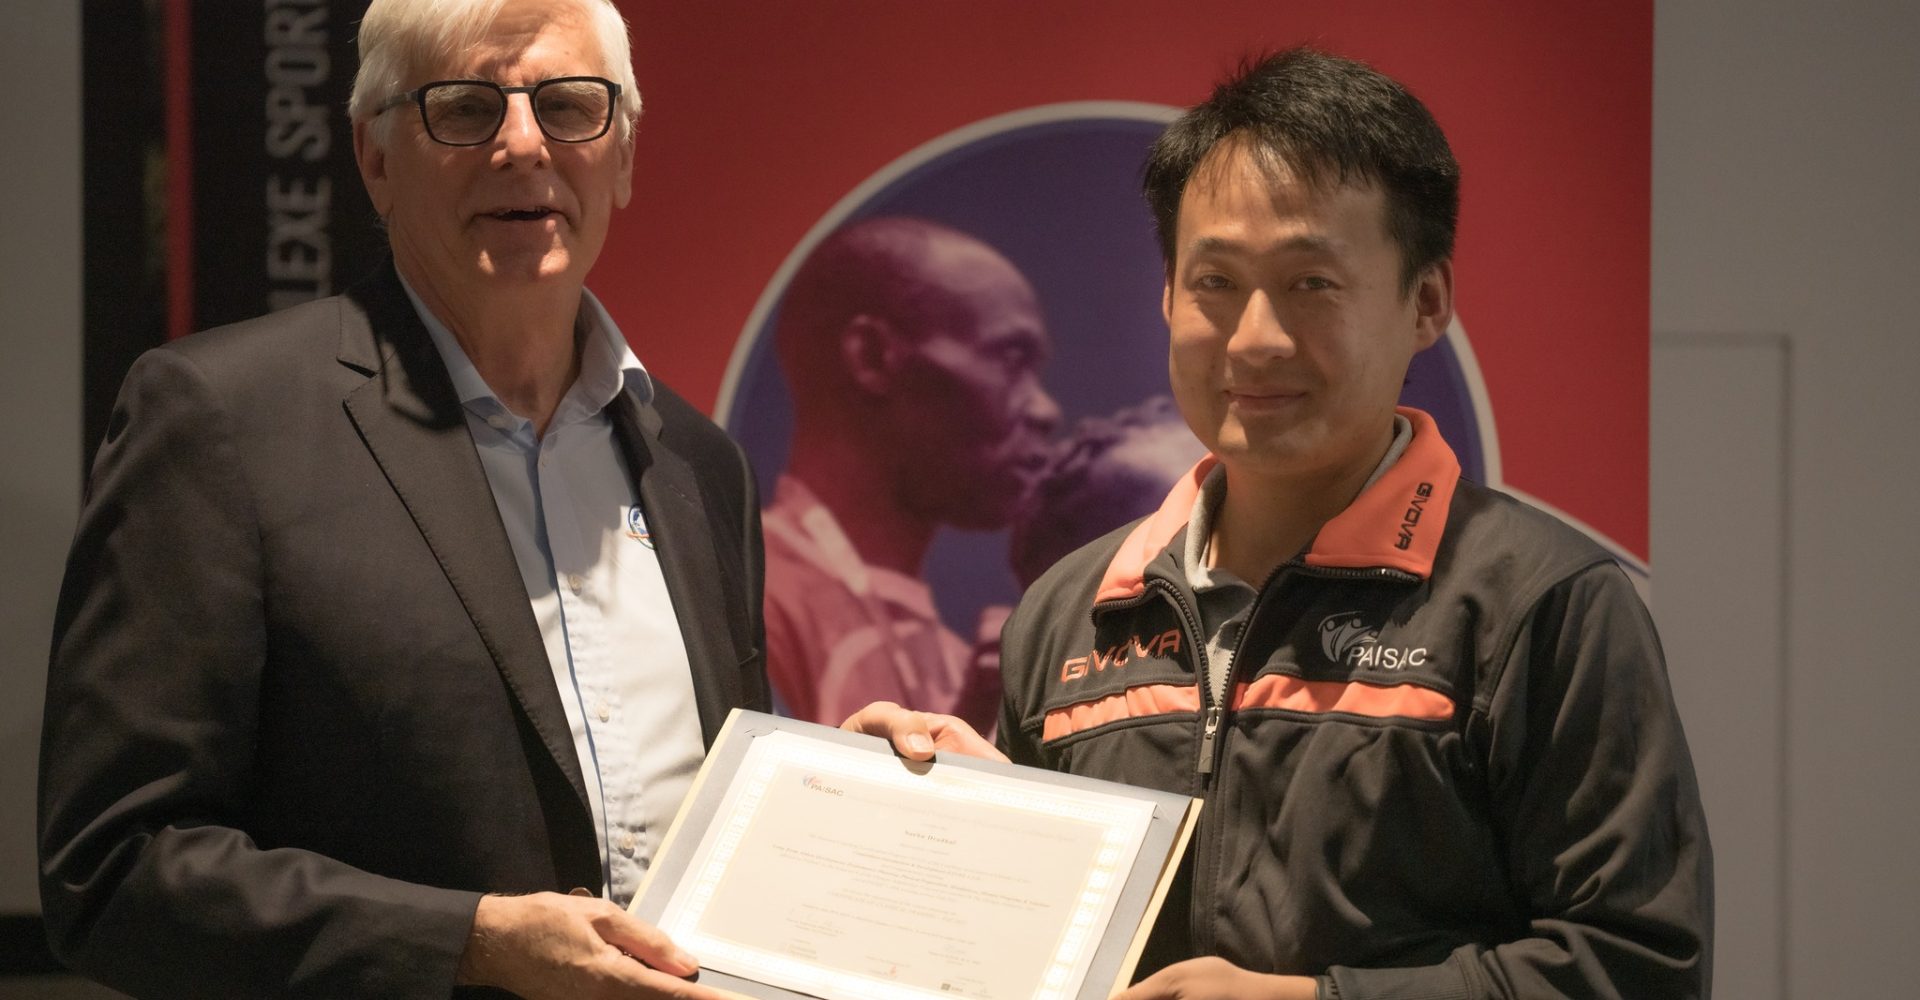 Olympic Solidarity and Bhutan Olympic Committee Rally Behind Coach’s Success